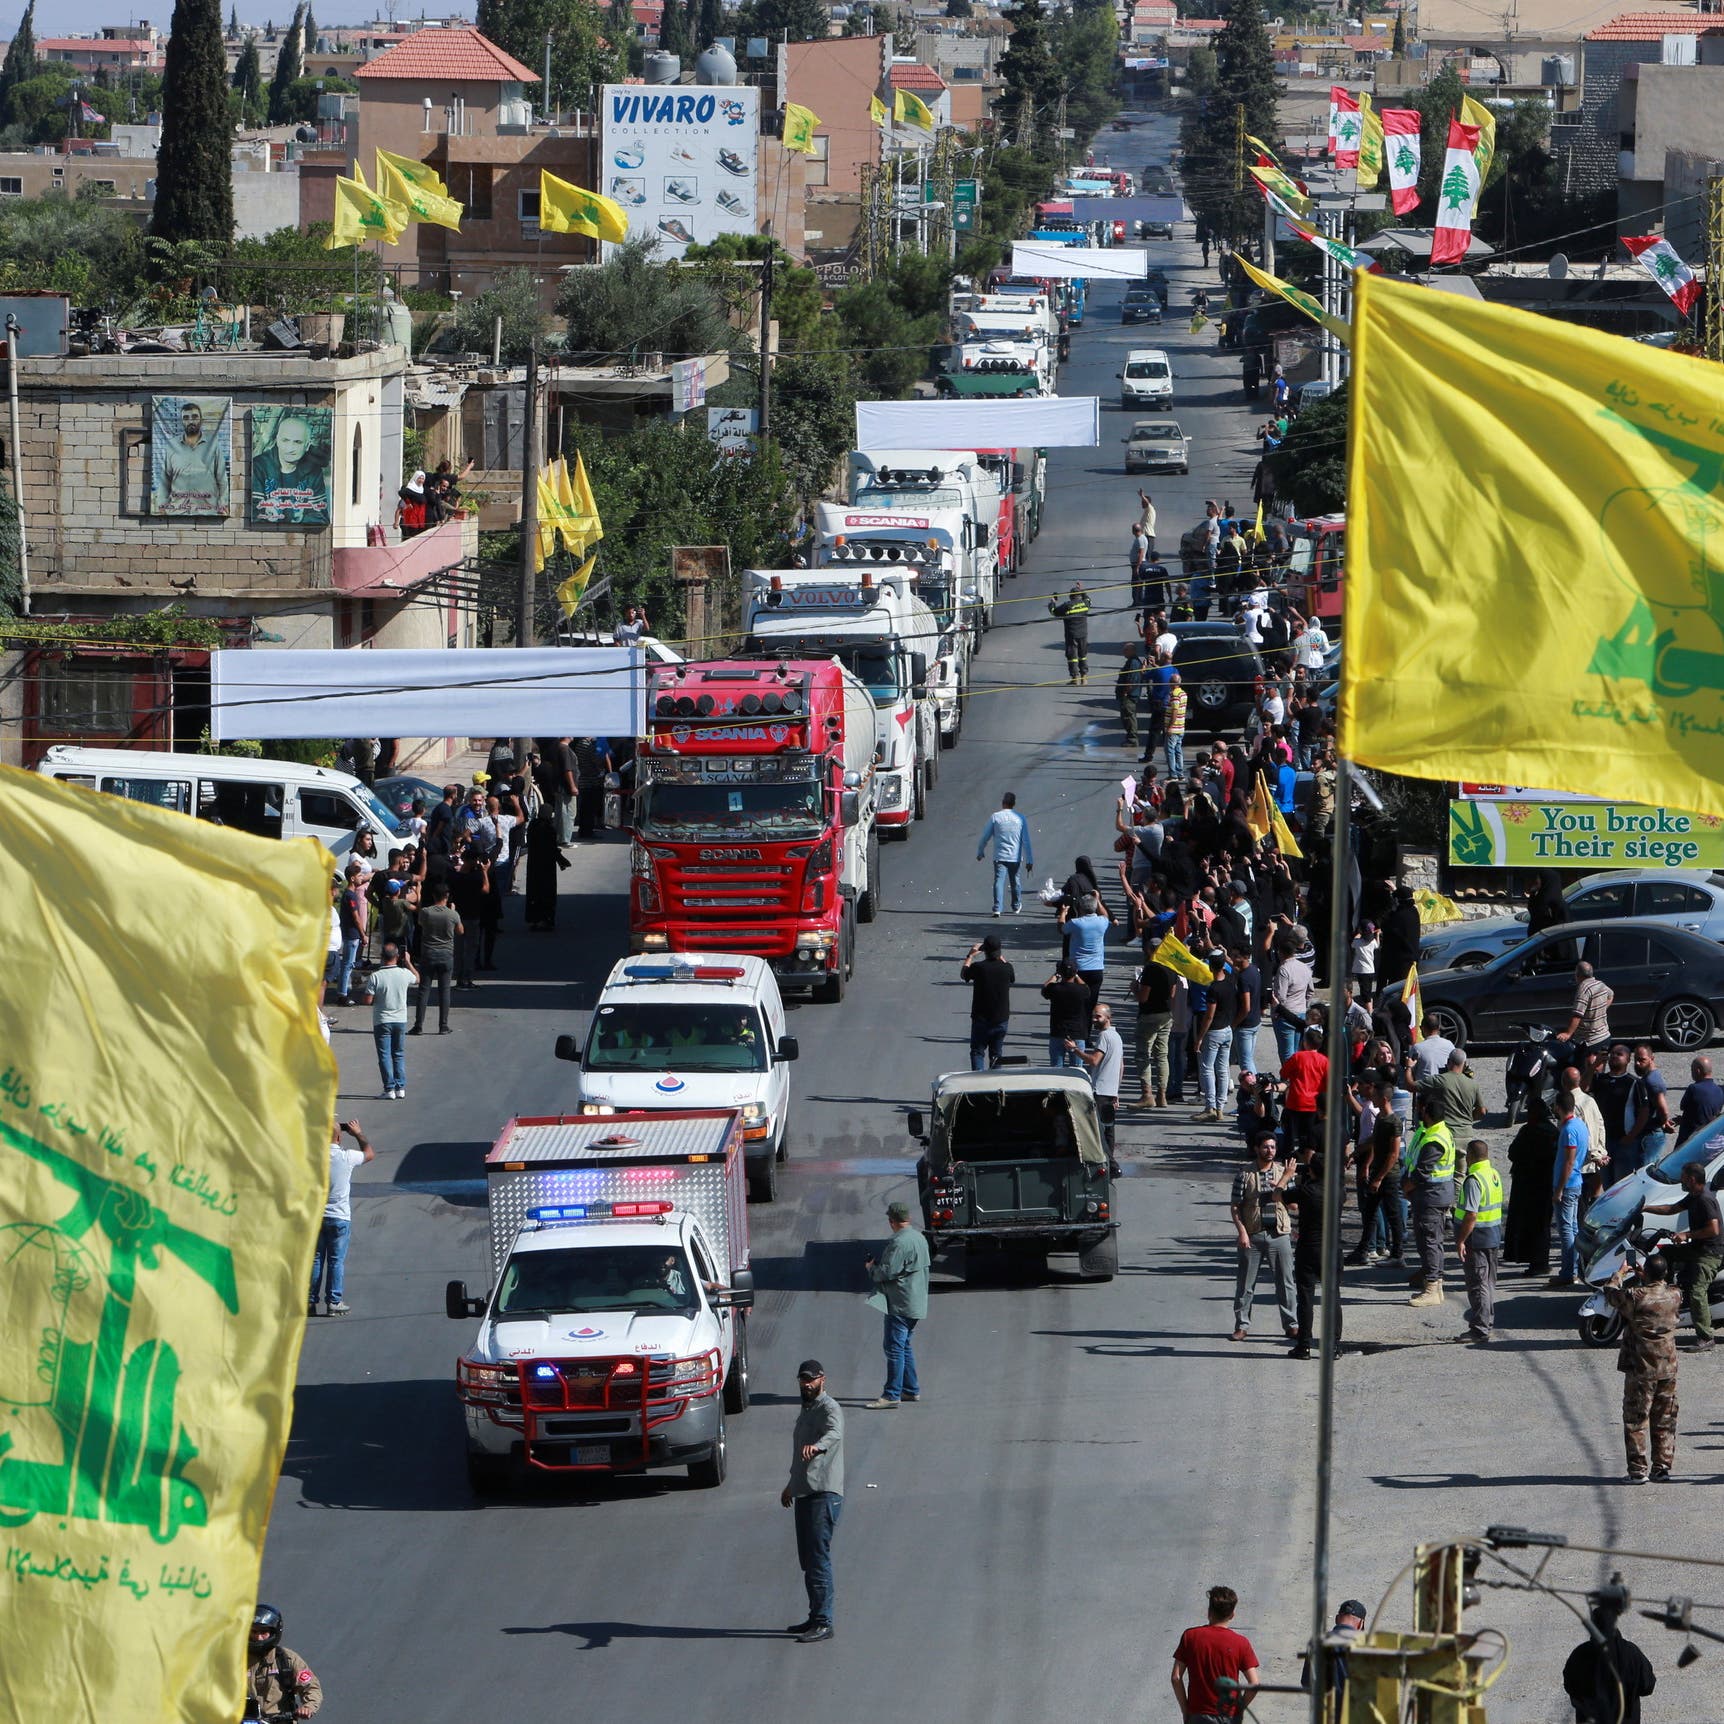 Hezbollah’s problem with justice